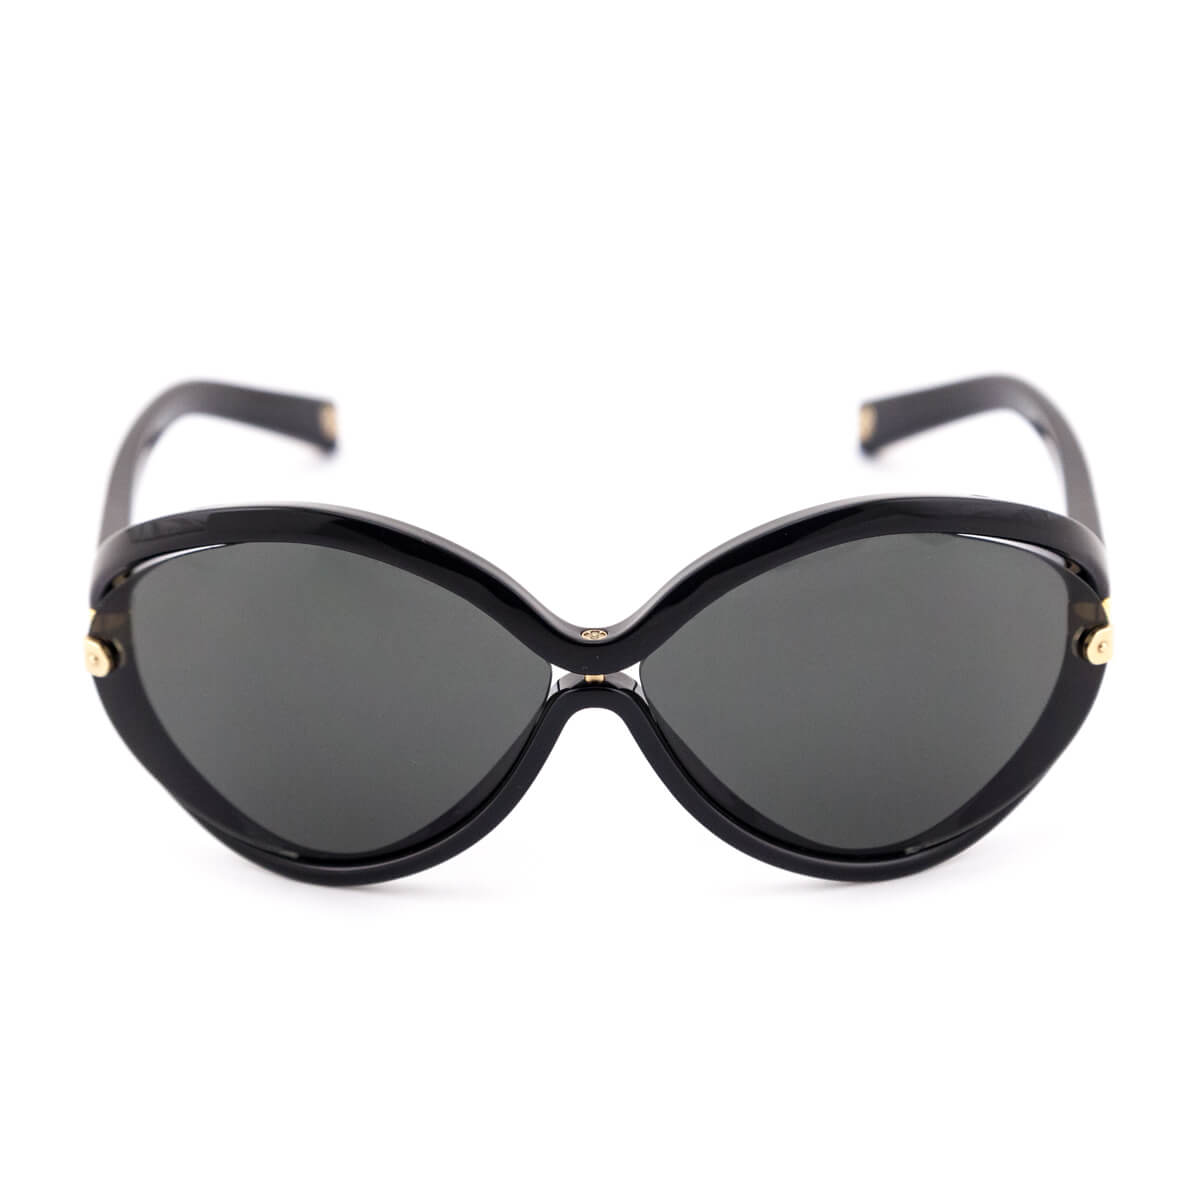 Louis Vuitton Black Oval Sunglasses - Love that Bag etc - Preowned Authentic Designer Handbags & Preloved Fashions